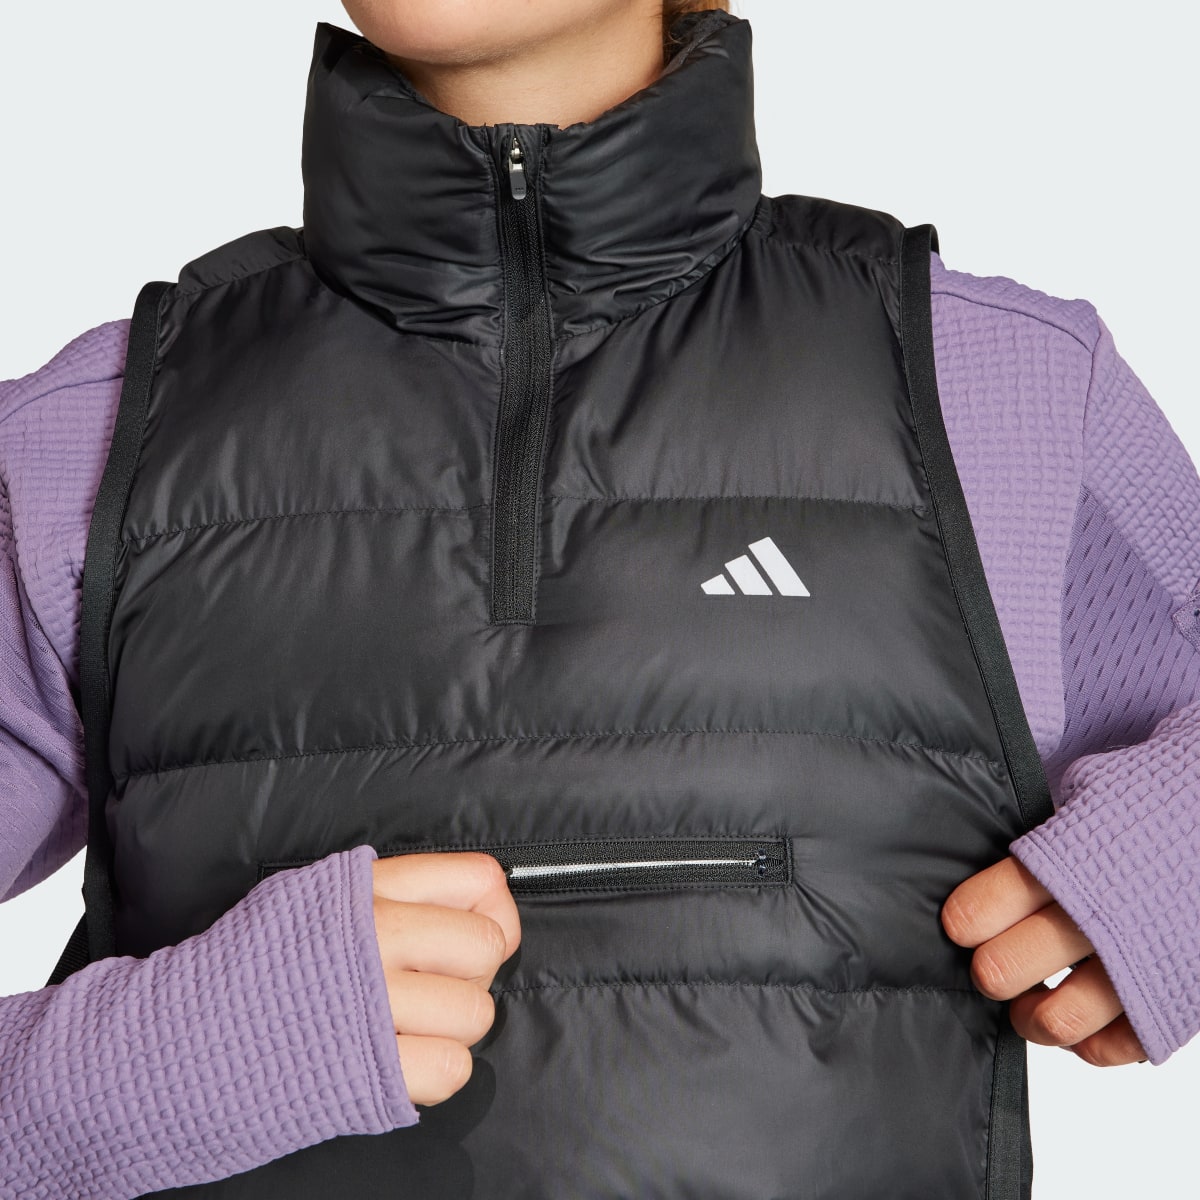 Adidas Ultimate Running Conquer the Elements Body Warmer Vest. 6